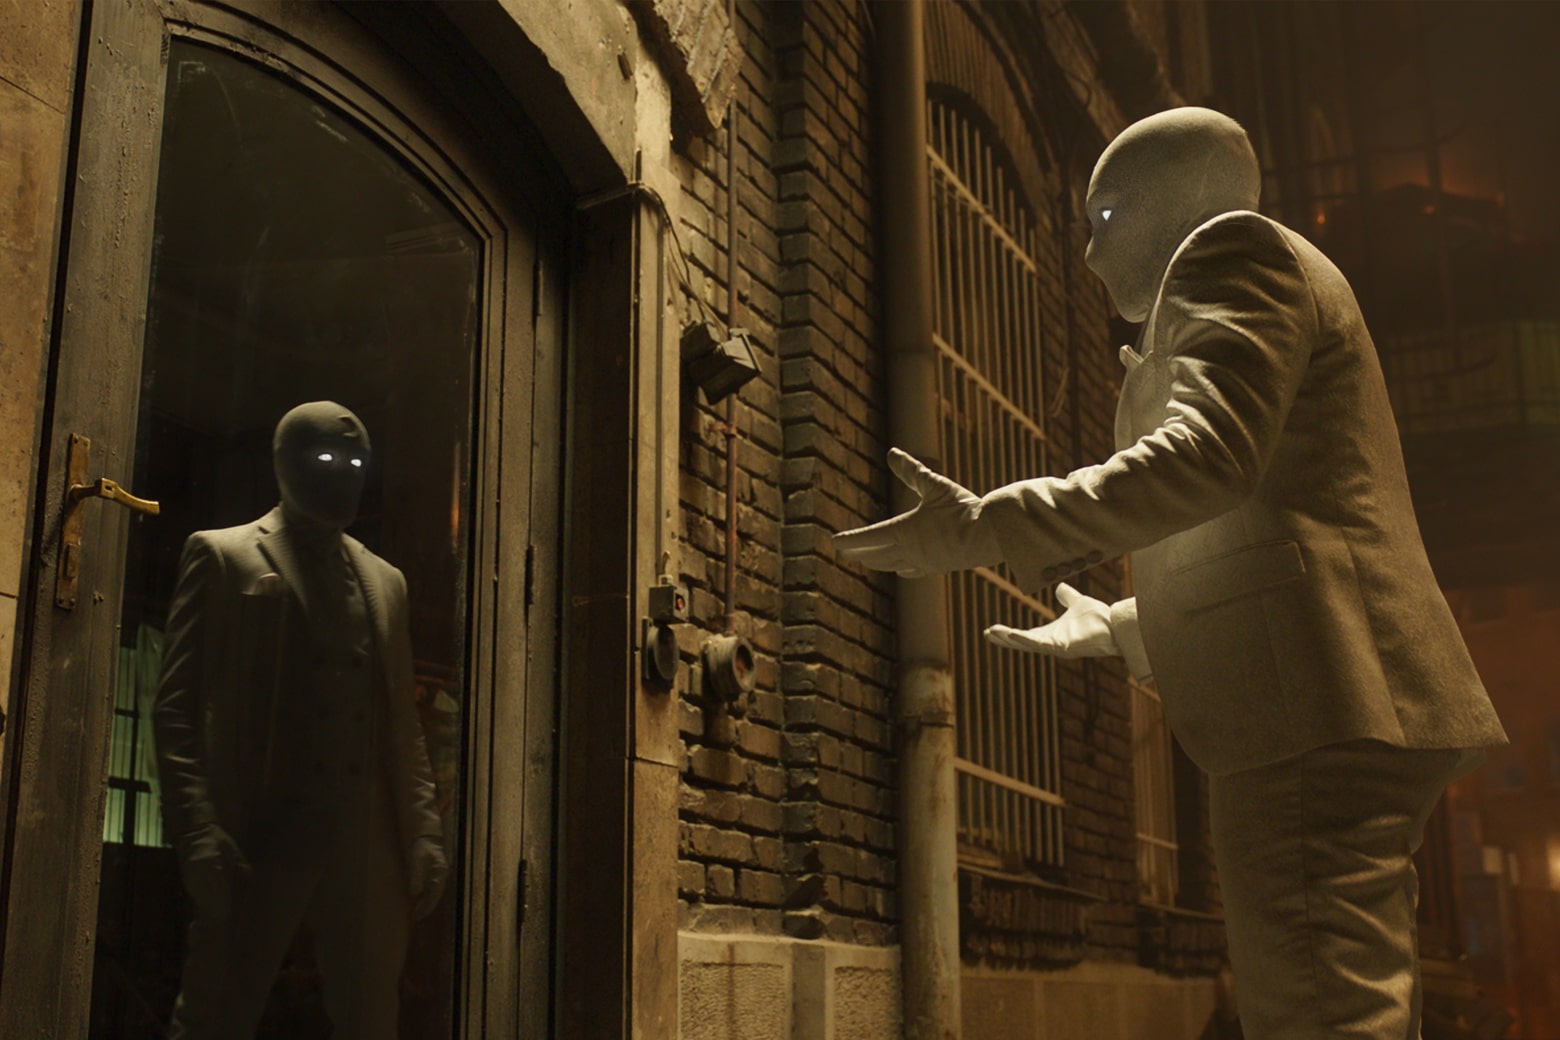 Moon Knight: Episode 2 Review 